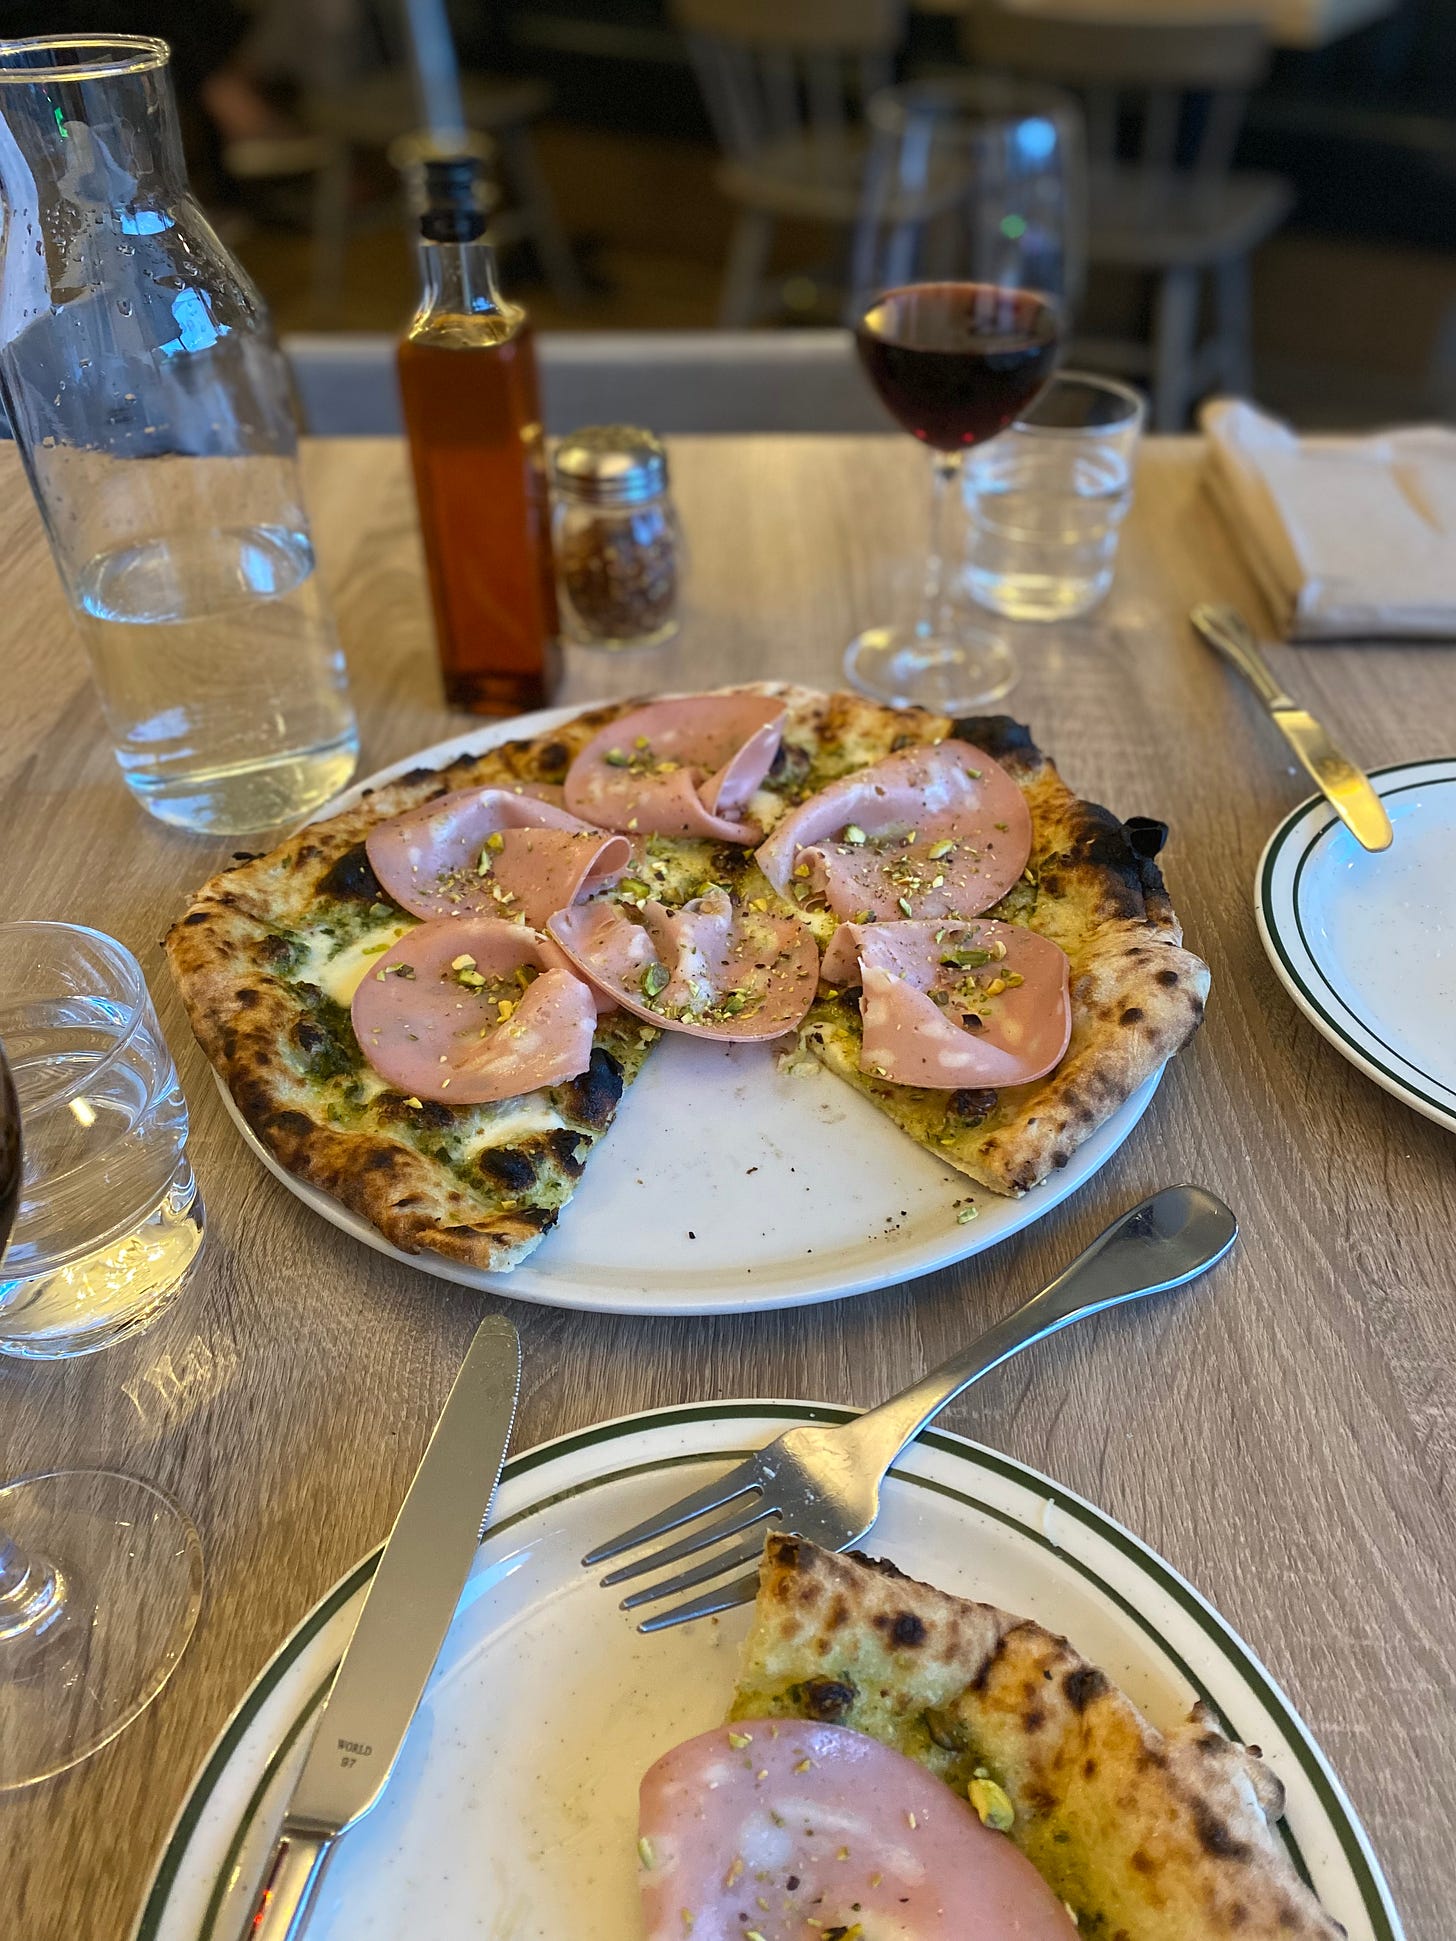 A table with drinks and condiments scattered around a large plate of the mortadella pizza above. The crust is browned and bubbled from the oven, and pesto and cheese are visible beneath slices of mortadella arranged on top with chopped pistachios over them. One slice is missing from the pizza, and can be seen partially on the plate in the foregrount, which has a knife and fork resting at angles on the edge.